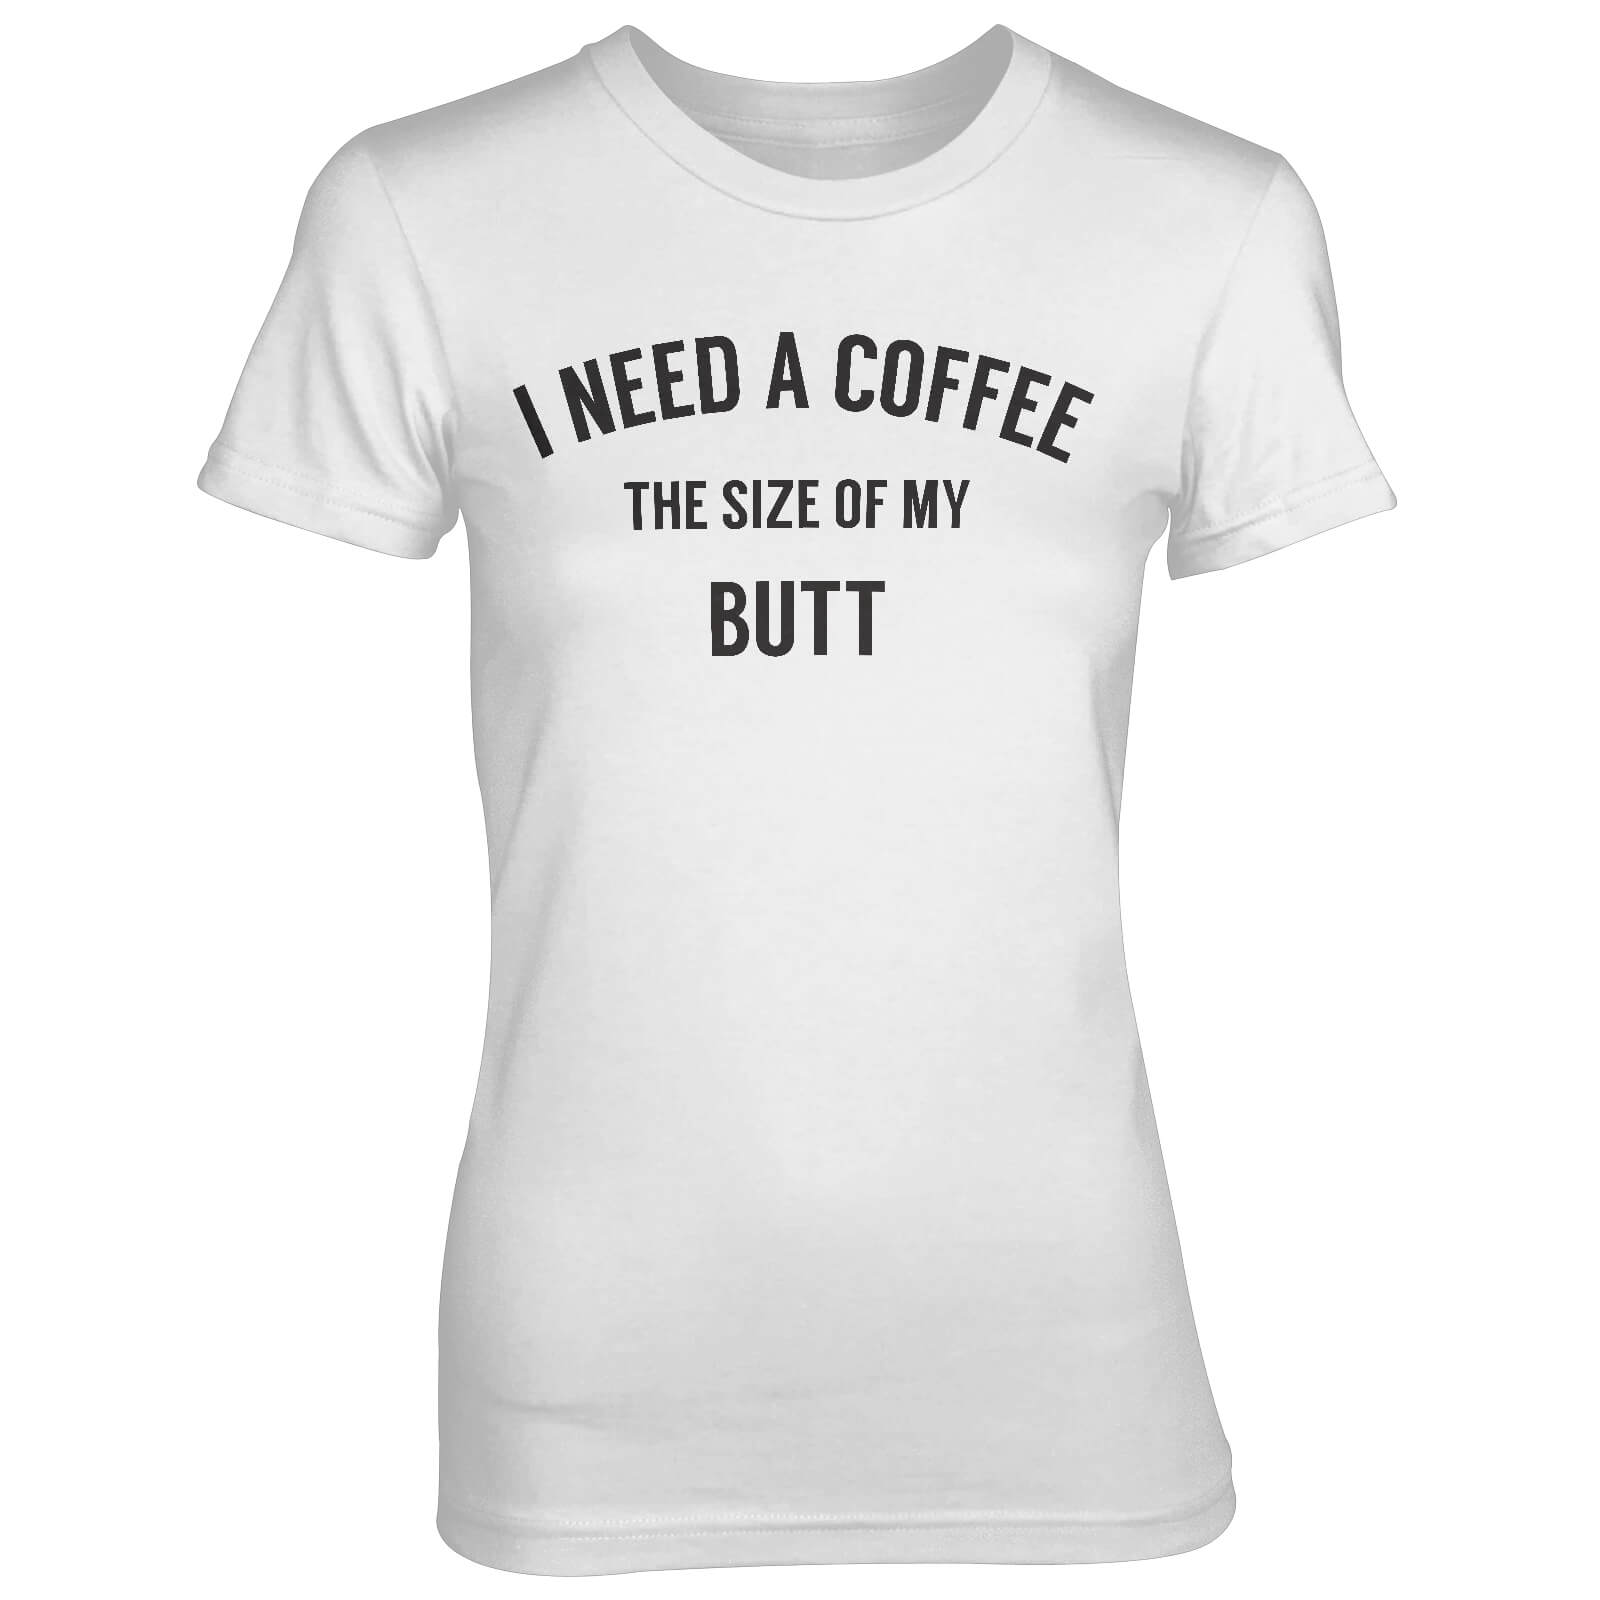 I Need A Coffee The Size Of My Butt Women's White T-Shirt - S - White